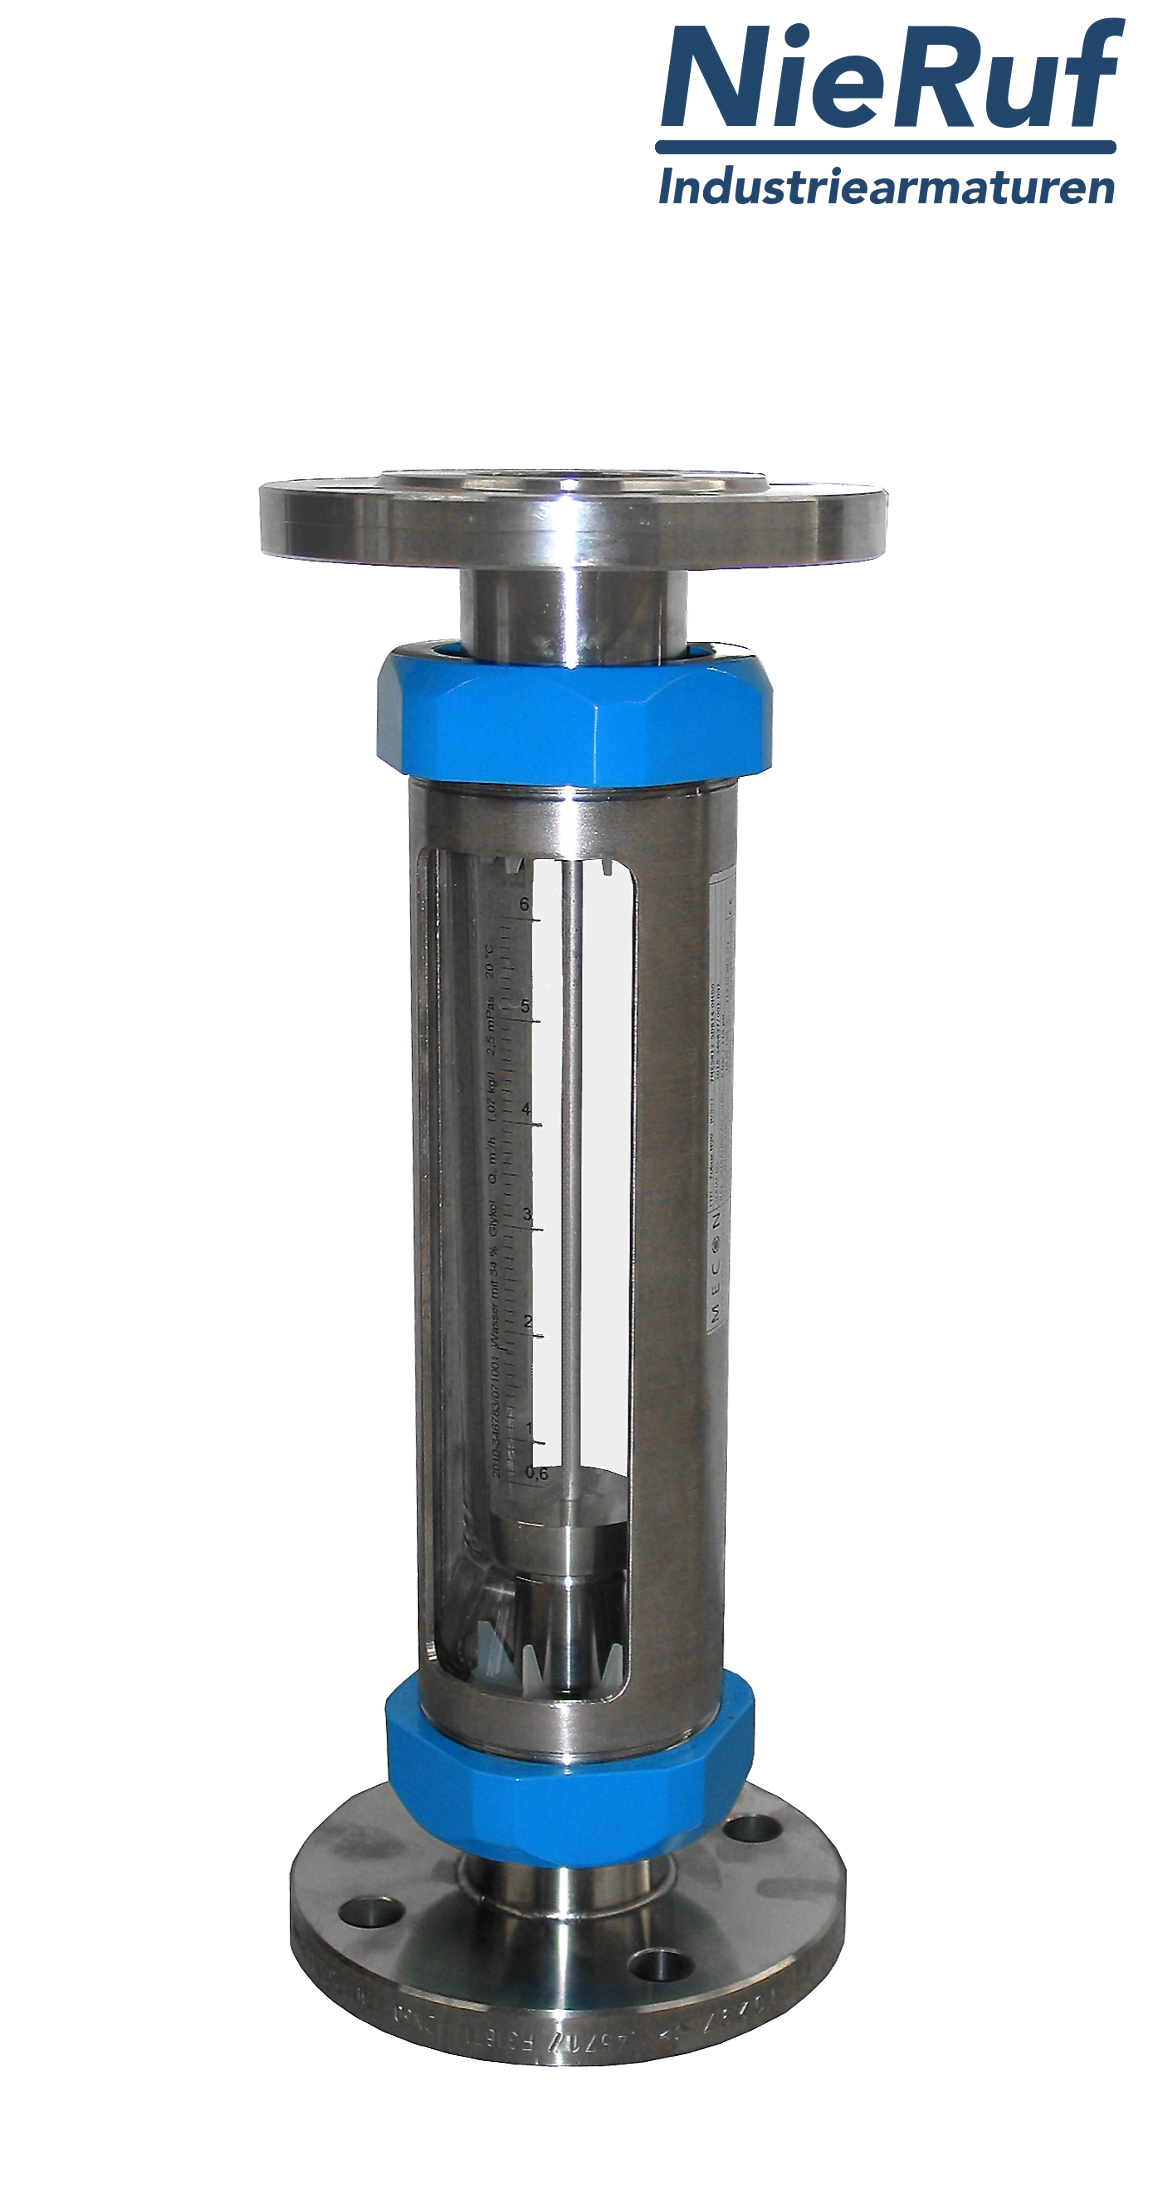 Variable area flowmeter stainless steel + borosilicate flange DN80 400.0 - 4000 l/h water FKM